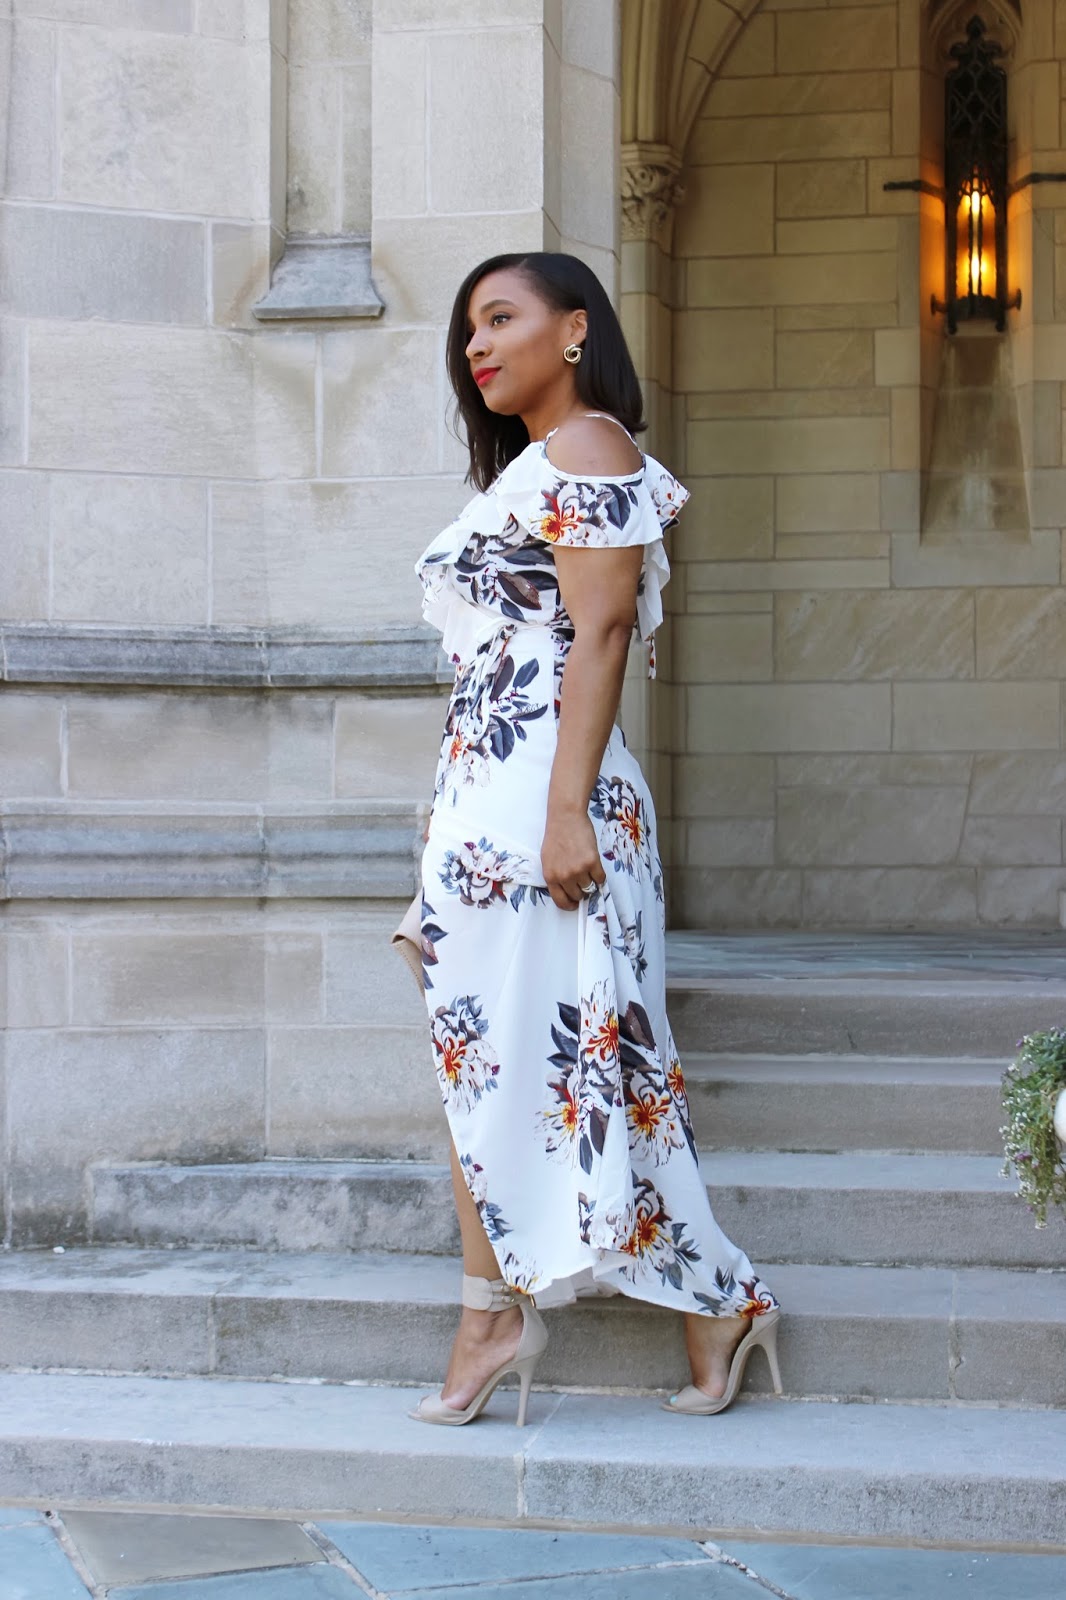 What To Wear To A Summer Wedding, Amiclubwear, floral dress, summer outfits, wedding guest outfit ideas, open back dress, summer dress, Amiclubwear dresses, open leg dress, flowy dress, dressed up outfit ideas, wedding guest attire